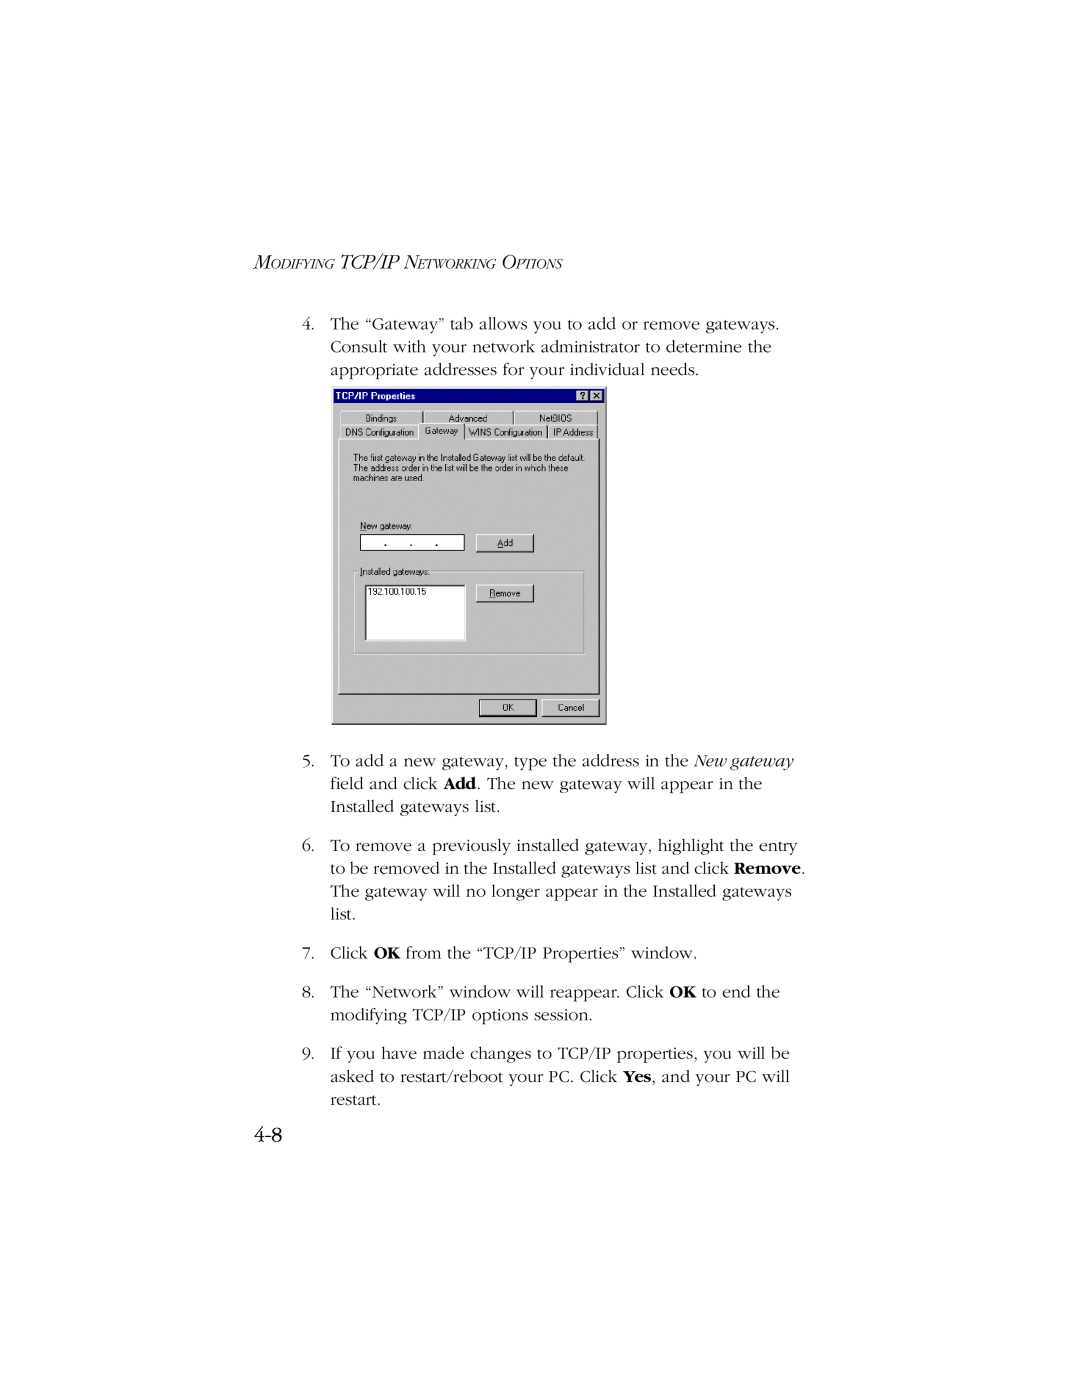 SMC Networks SMC7003-USB manual Click OK from the “TCP/IP Properties” window 